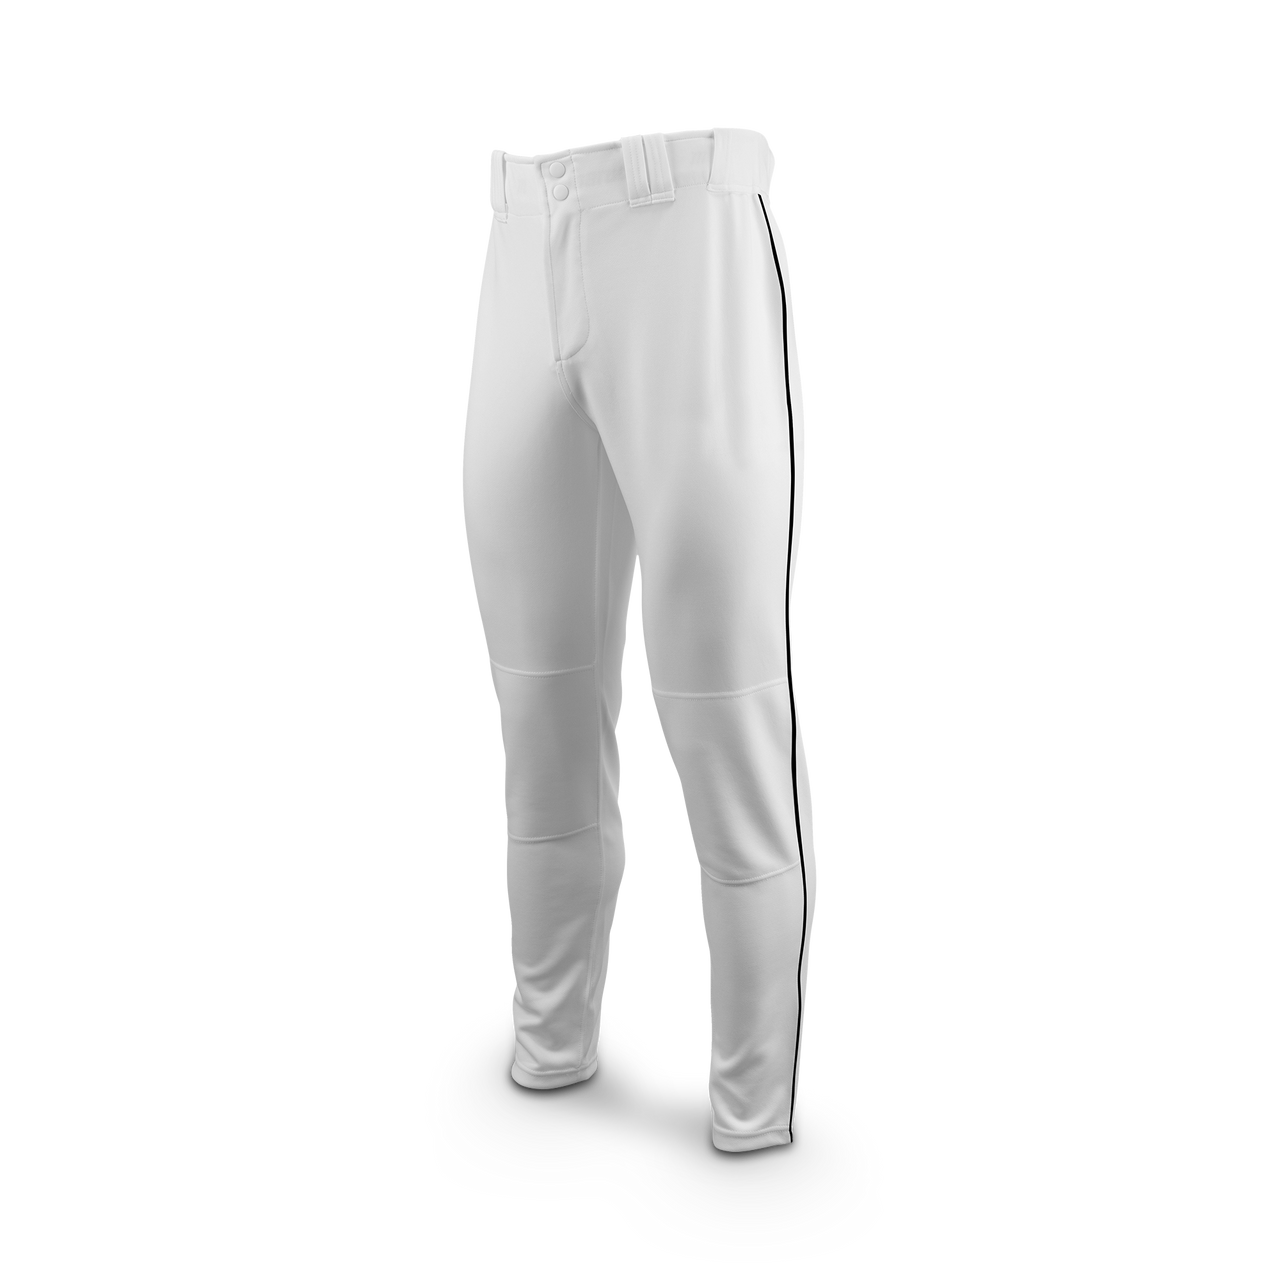 Marucci Men's Excel Full Length Piped Pant Apparel MARUCCI White/Navy Small 